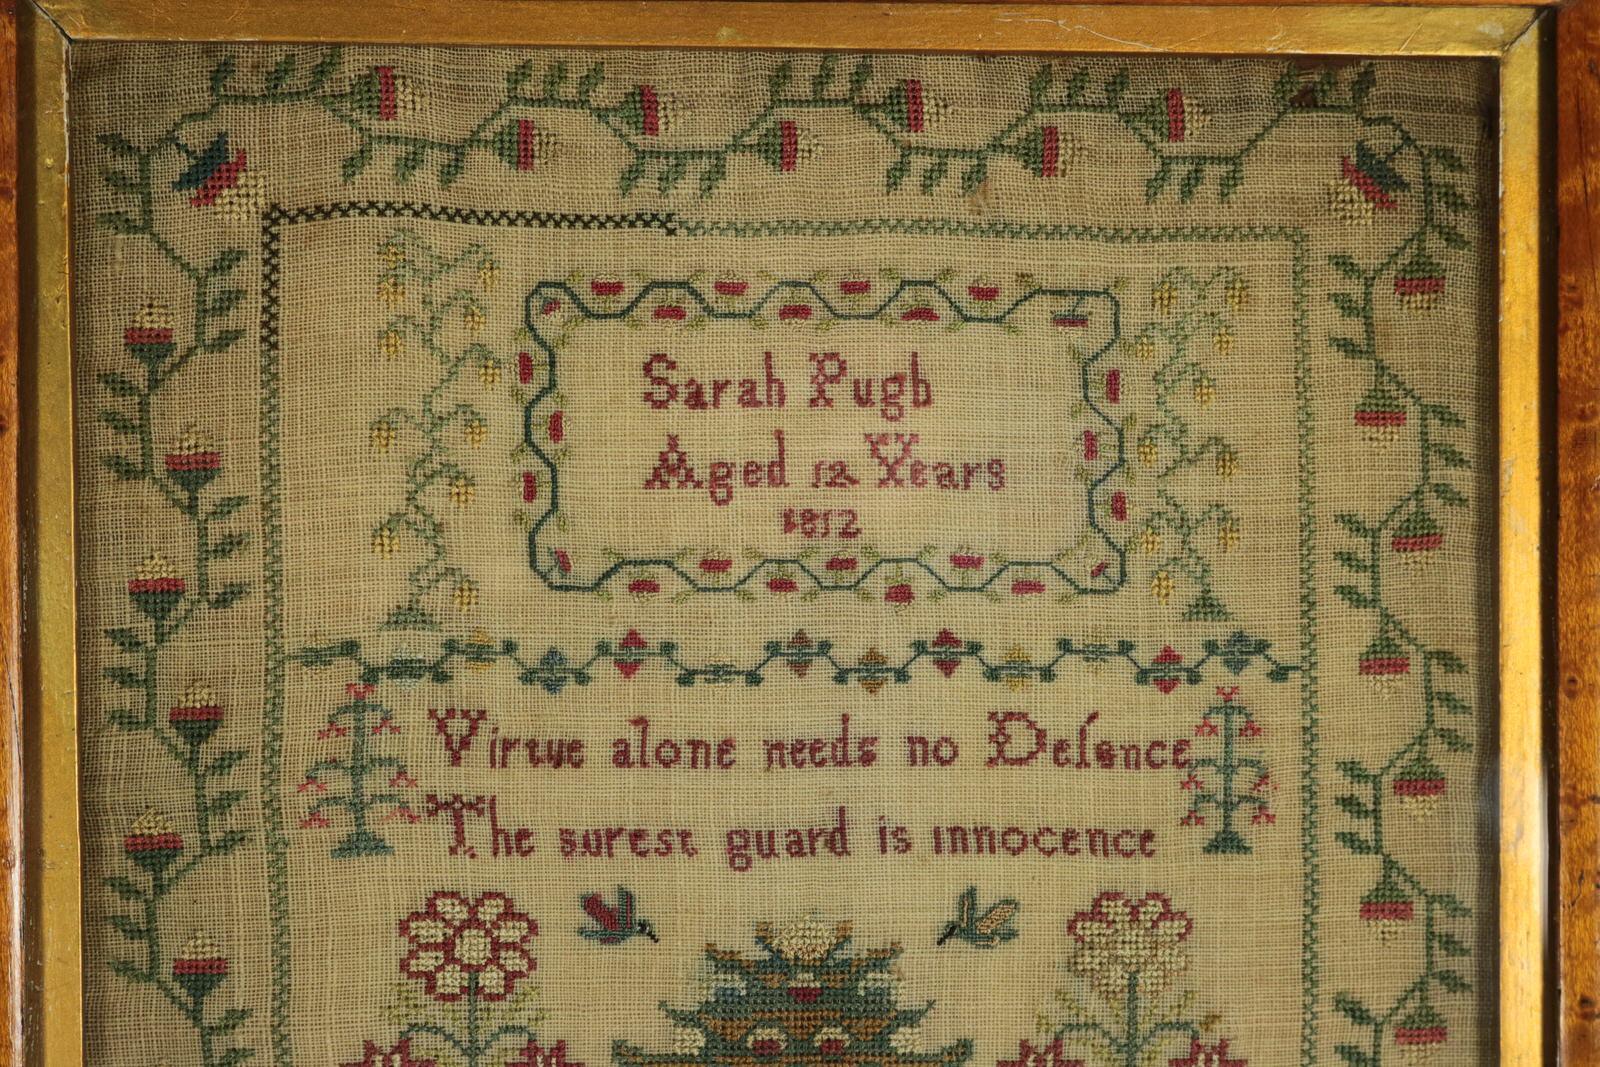 Scottish sampler dated 1812 by Sarah Pugh. Worked in silk on linen ground, in a variety of stitches. Meandering strawberry border. Colours greens, red, cream, black, silver, browns and yellow. Inscription reads, 'Virtue alone needs no Defence / The